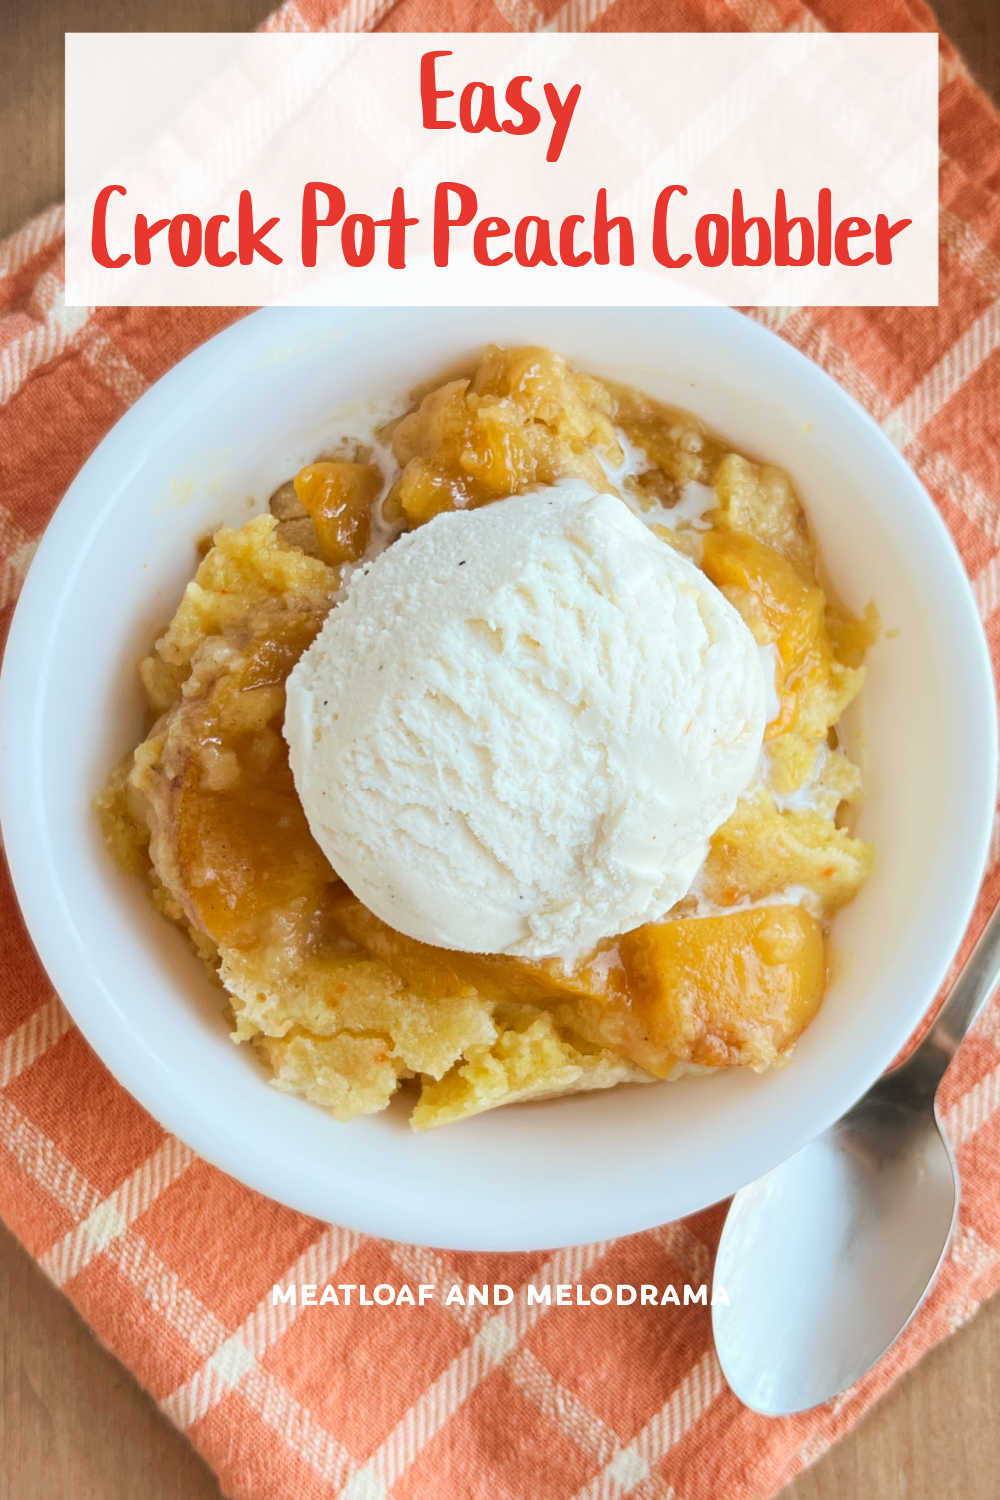 This easy Crock Pot Peach Cobbler recipe uses cake mix, canned peaches and butter for an easy dessert made entirely in the slow cooker. The whole family will love this simple recipe for the perfect summer dessert! via @meamel